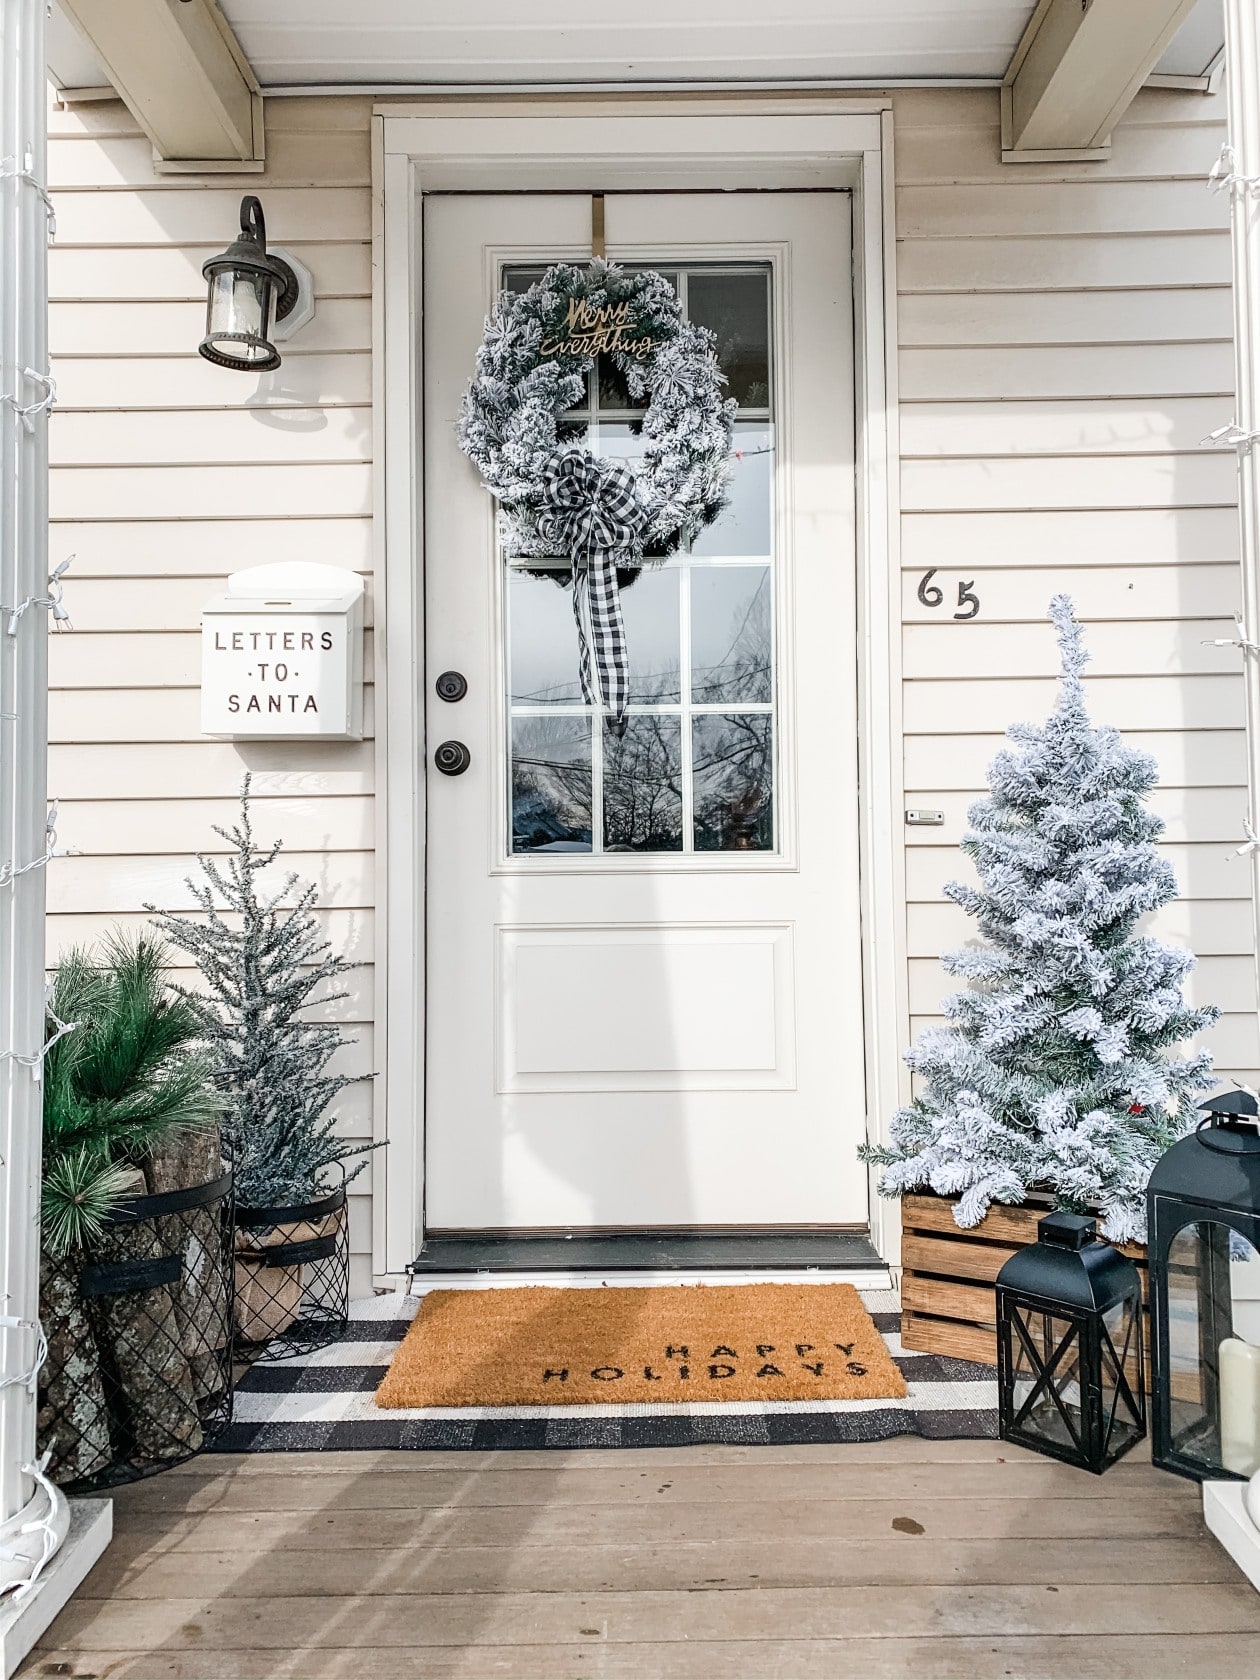 Farmhouse Winter Porch with Flocked Trees, logs, and metal baskets